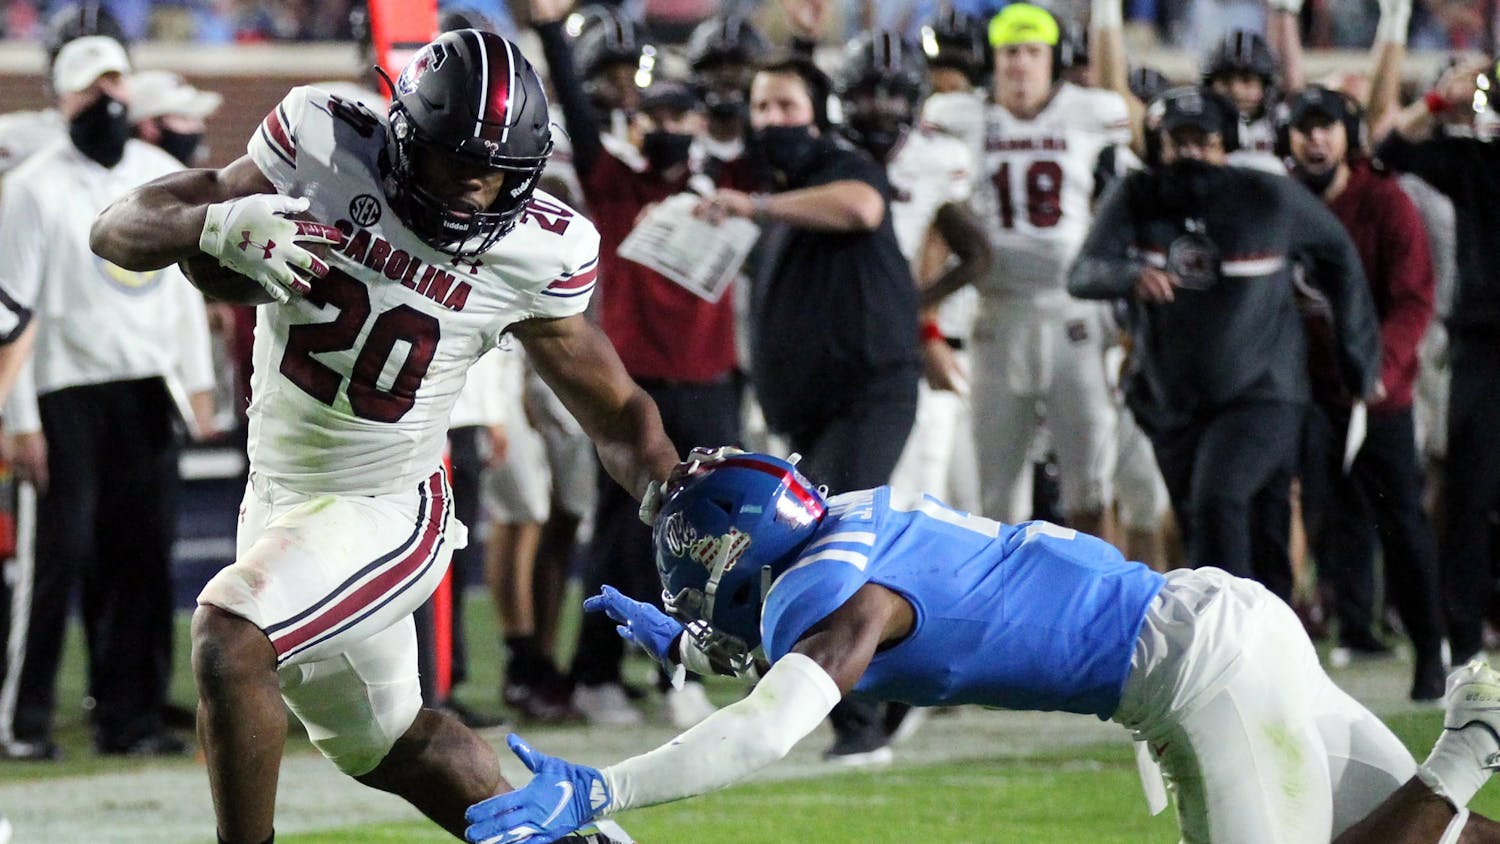 Sophomore running back Kevin Harris avoids being tackled while carrying the ball during the game against the Ole Miss Rebels Saturday. The Gamecocks lost 59-42 and their record fell to 2-5.